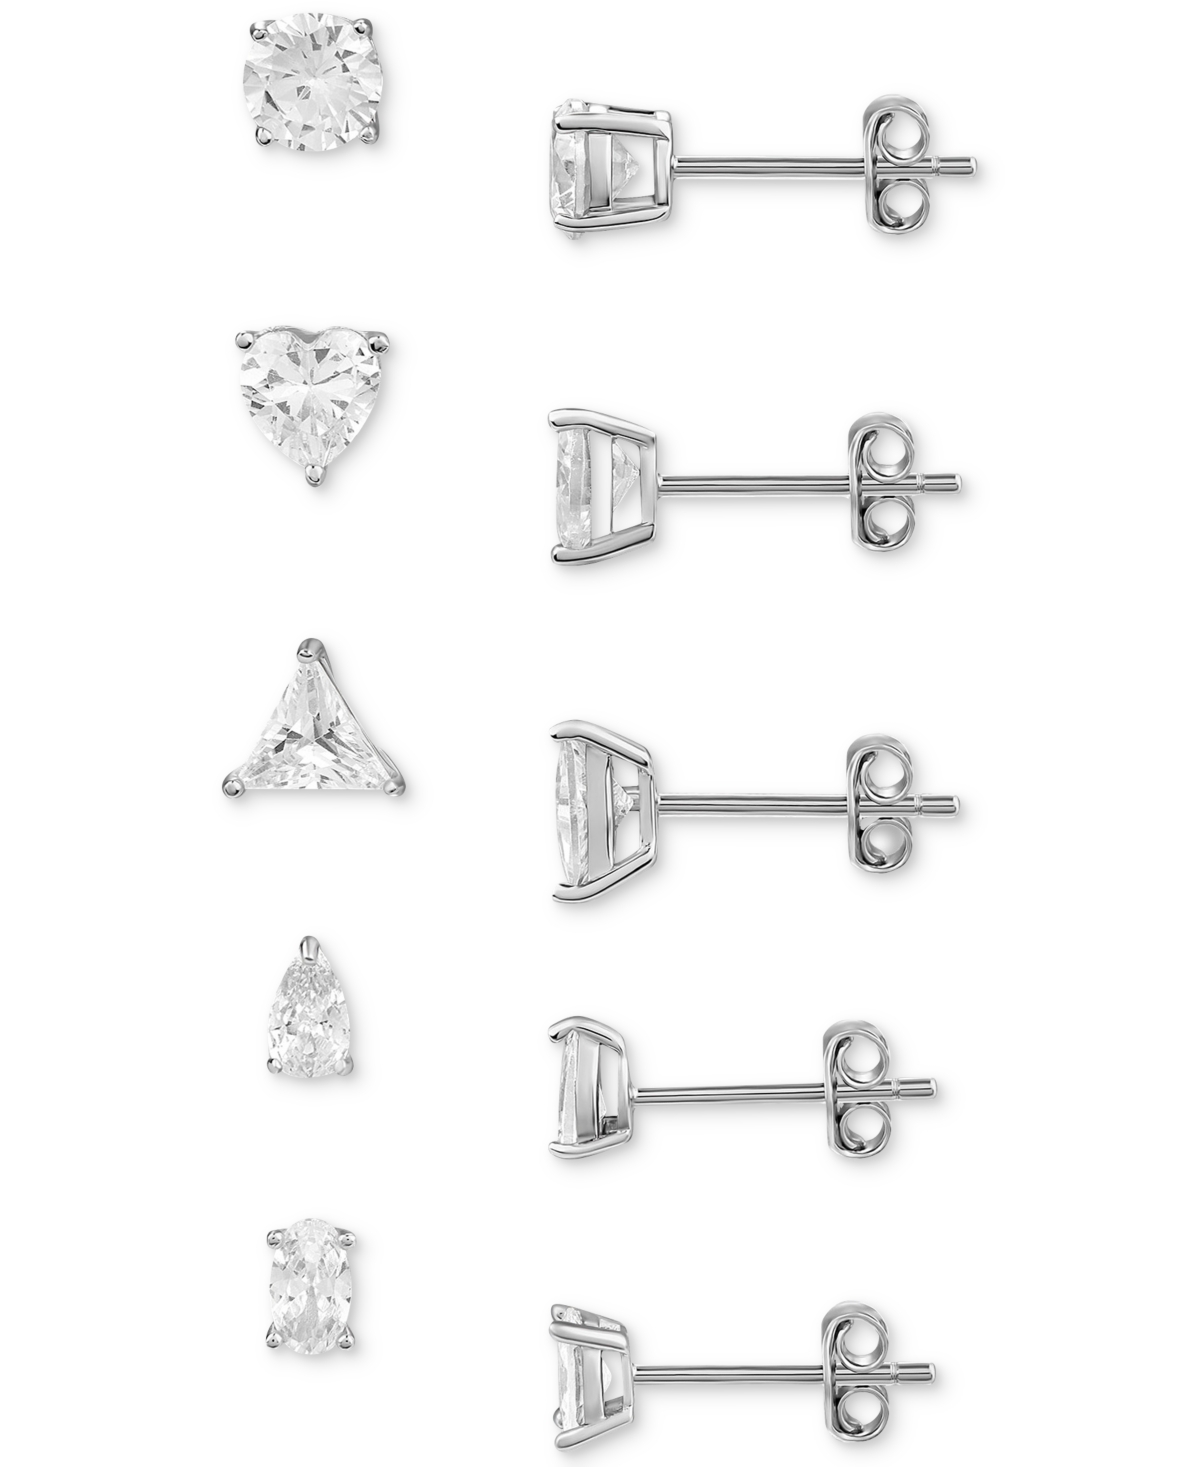 5-Pc. Set Cubic Zirconia Solitaire Multi-Cut Stud Earrings in Sterling Silver, Created for Macy's - Sterling Silver